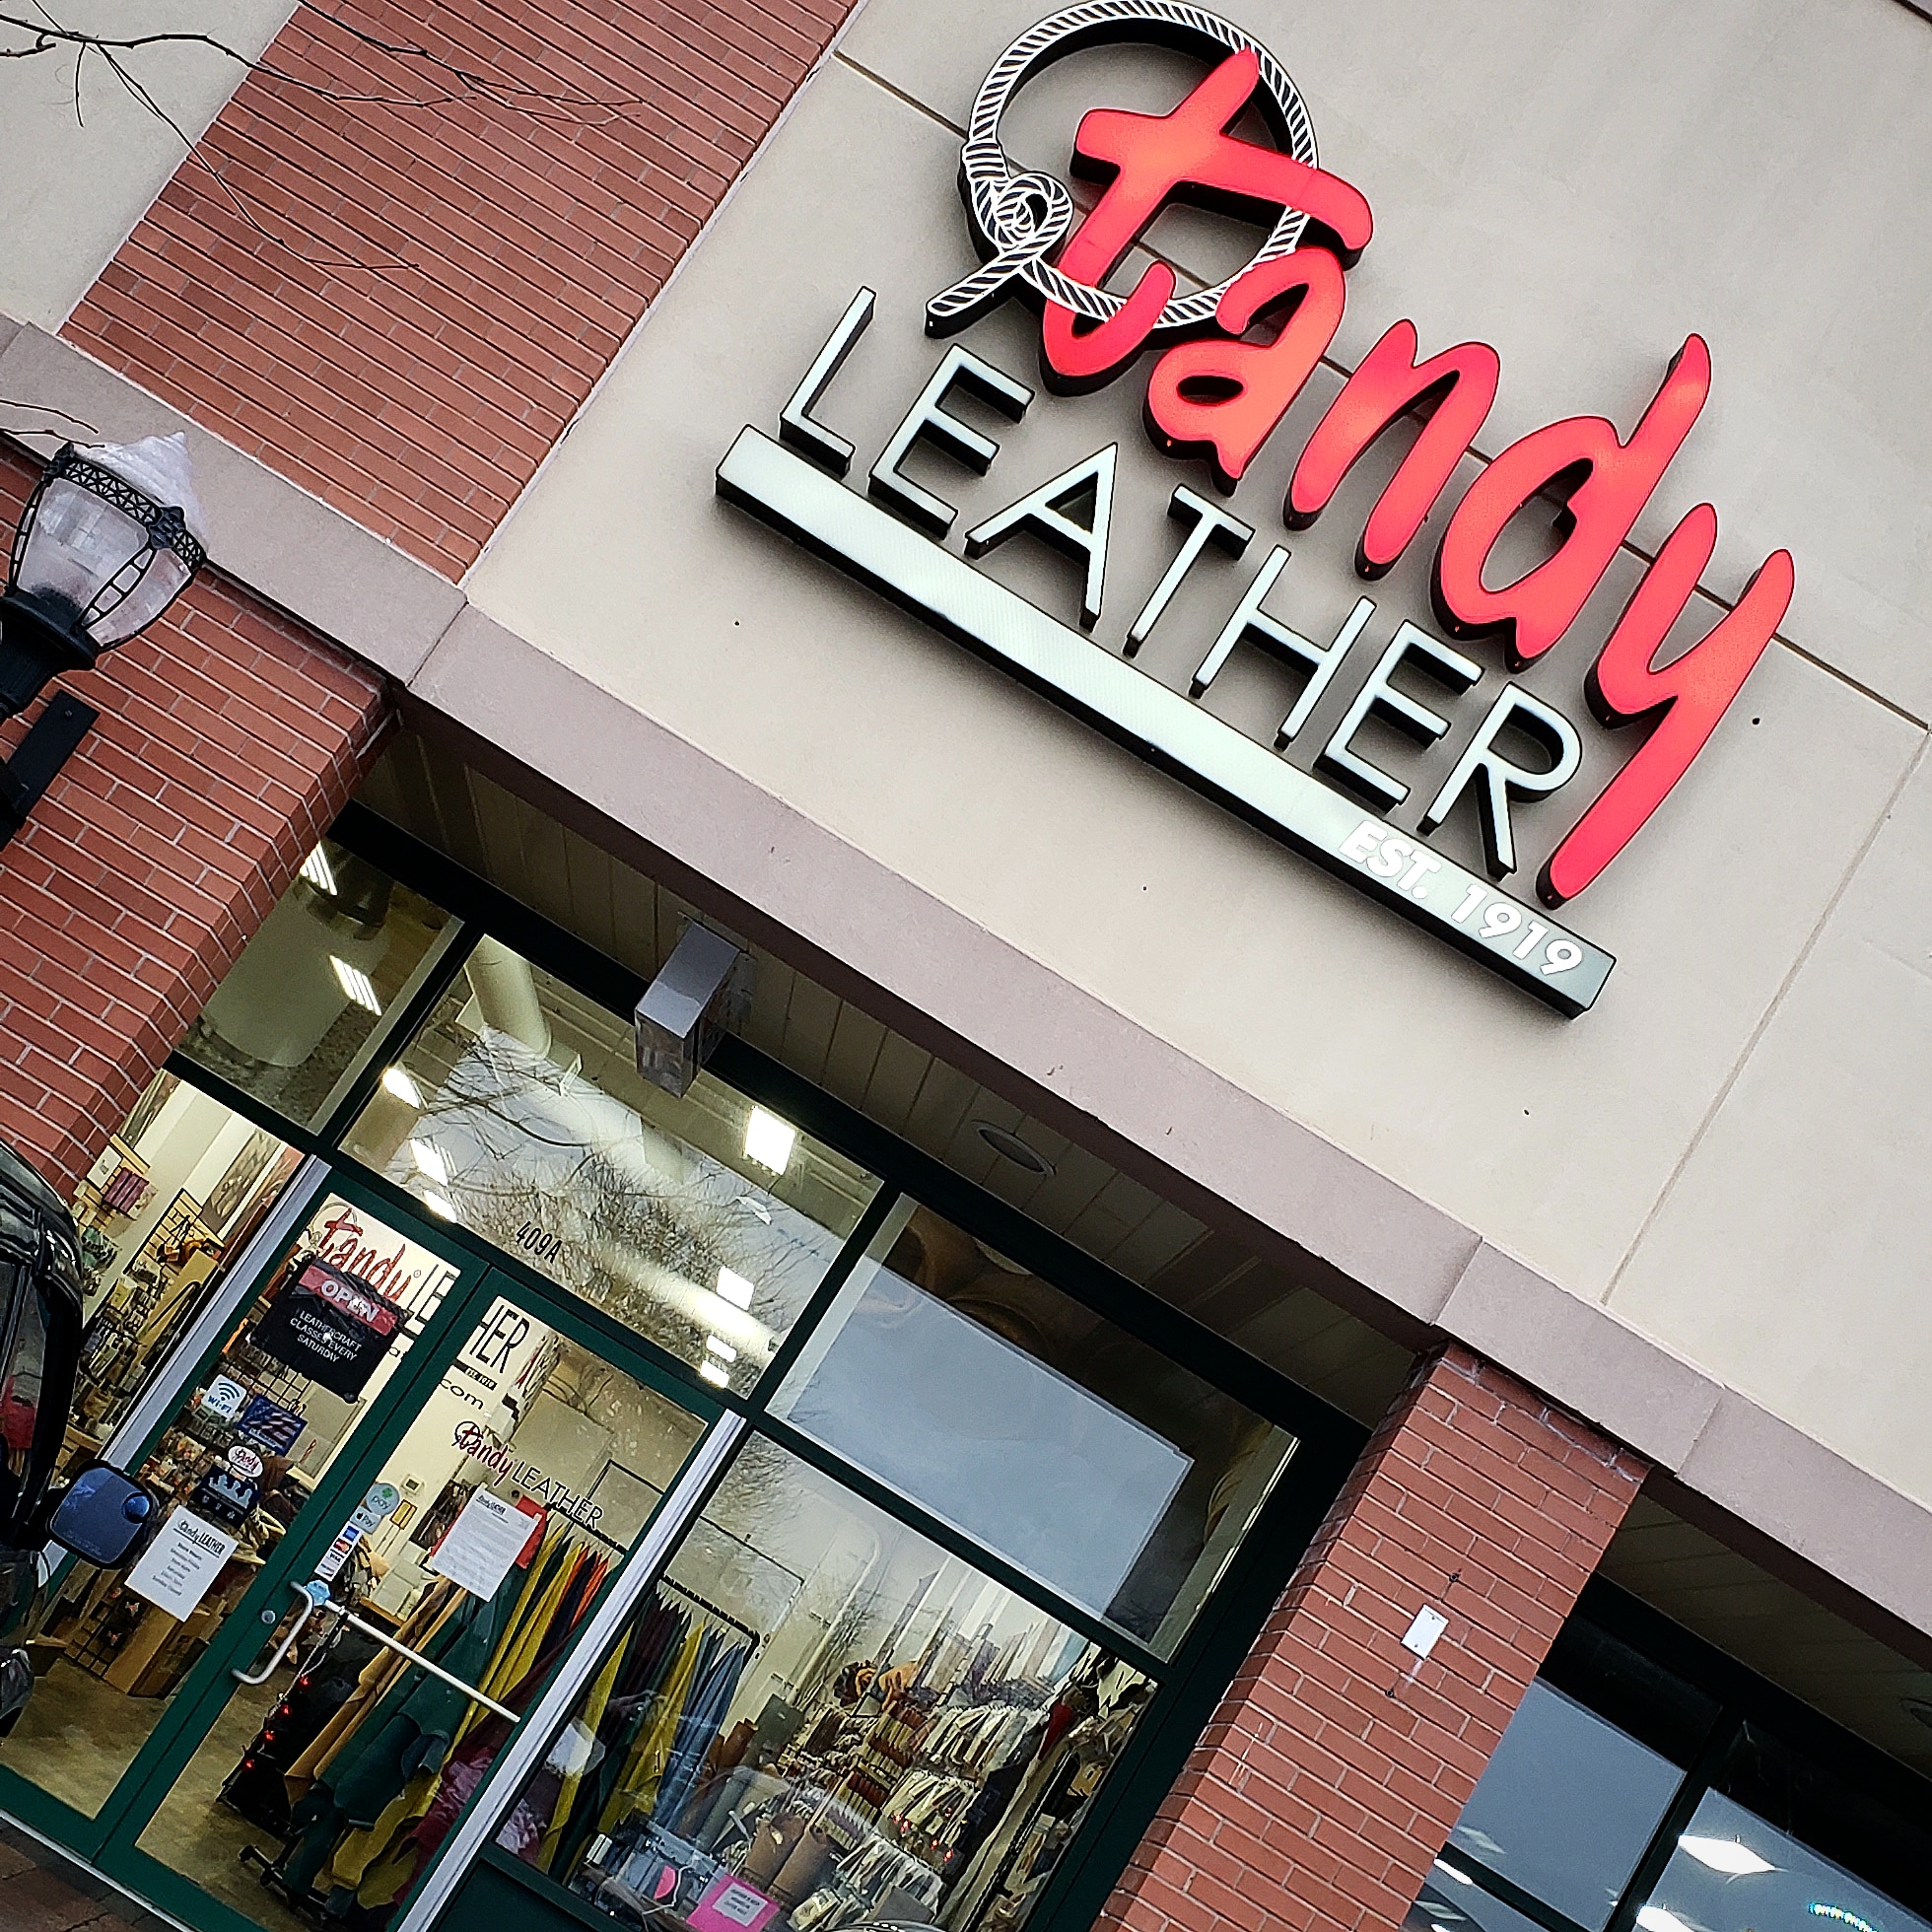 Tandy Leather Pittsburgh - 118, 1075 S Main St, #108, Greensburg